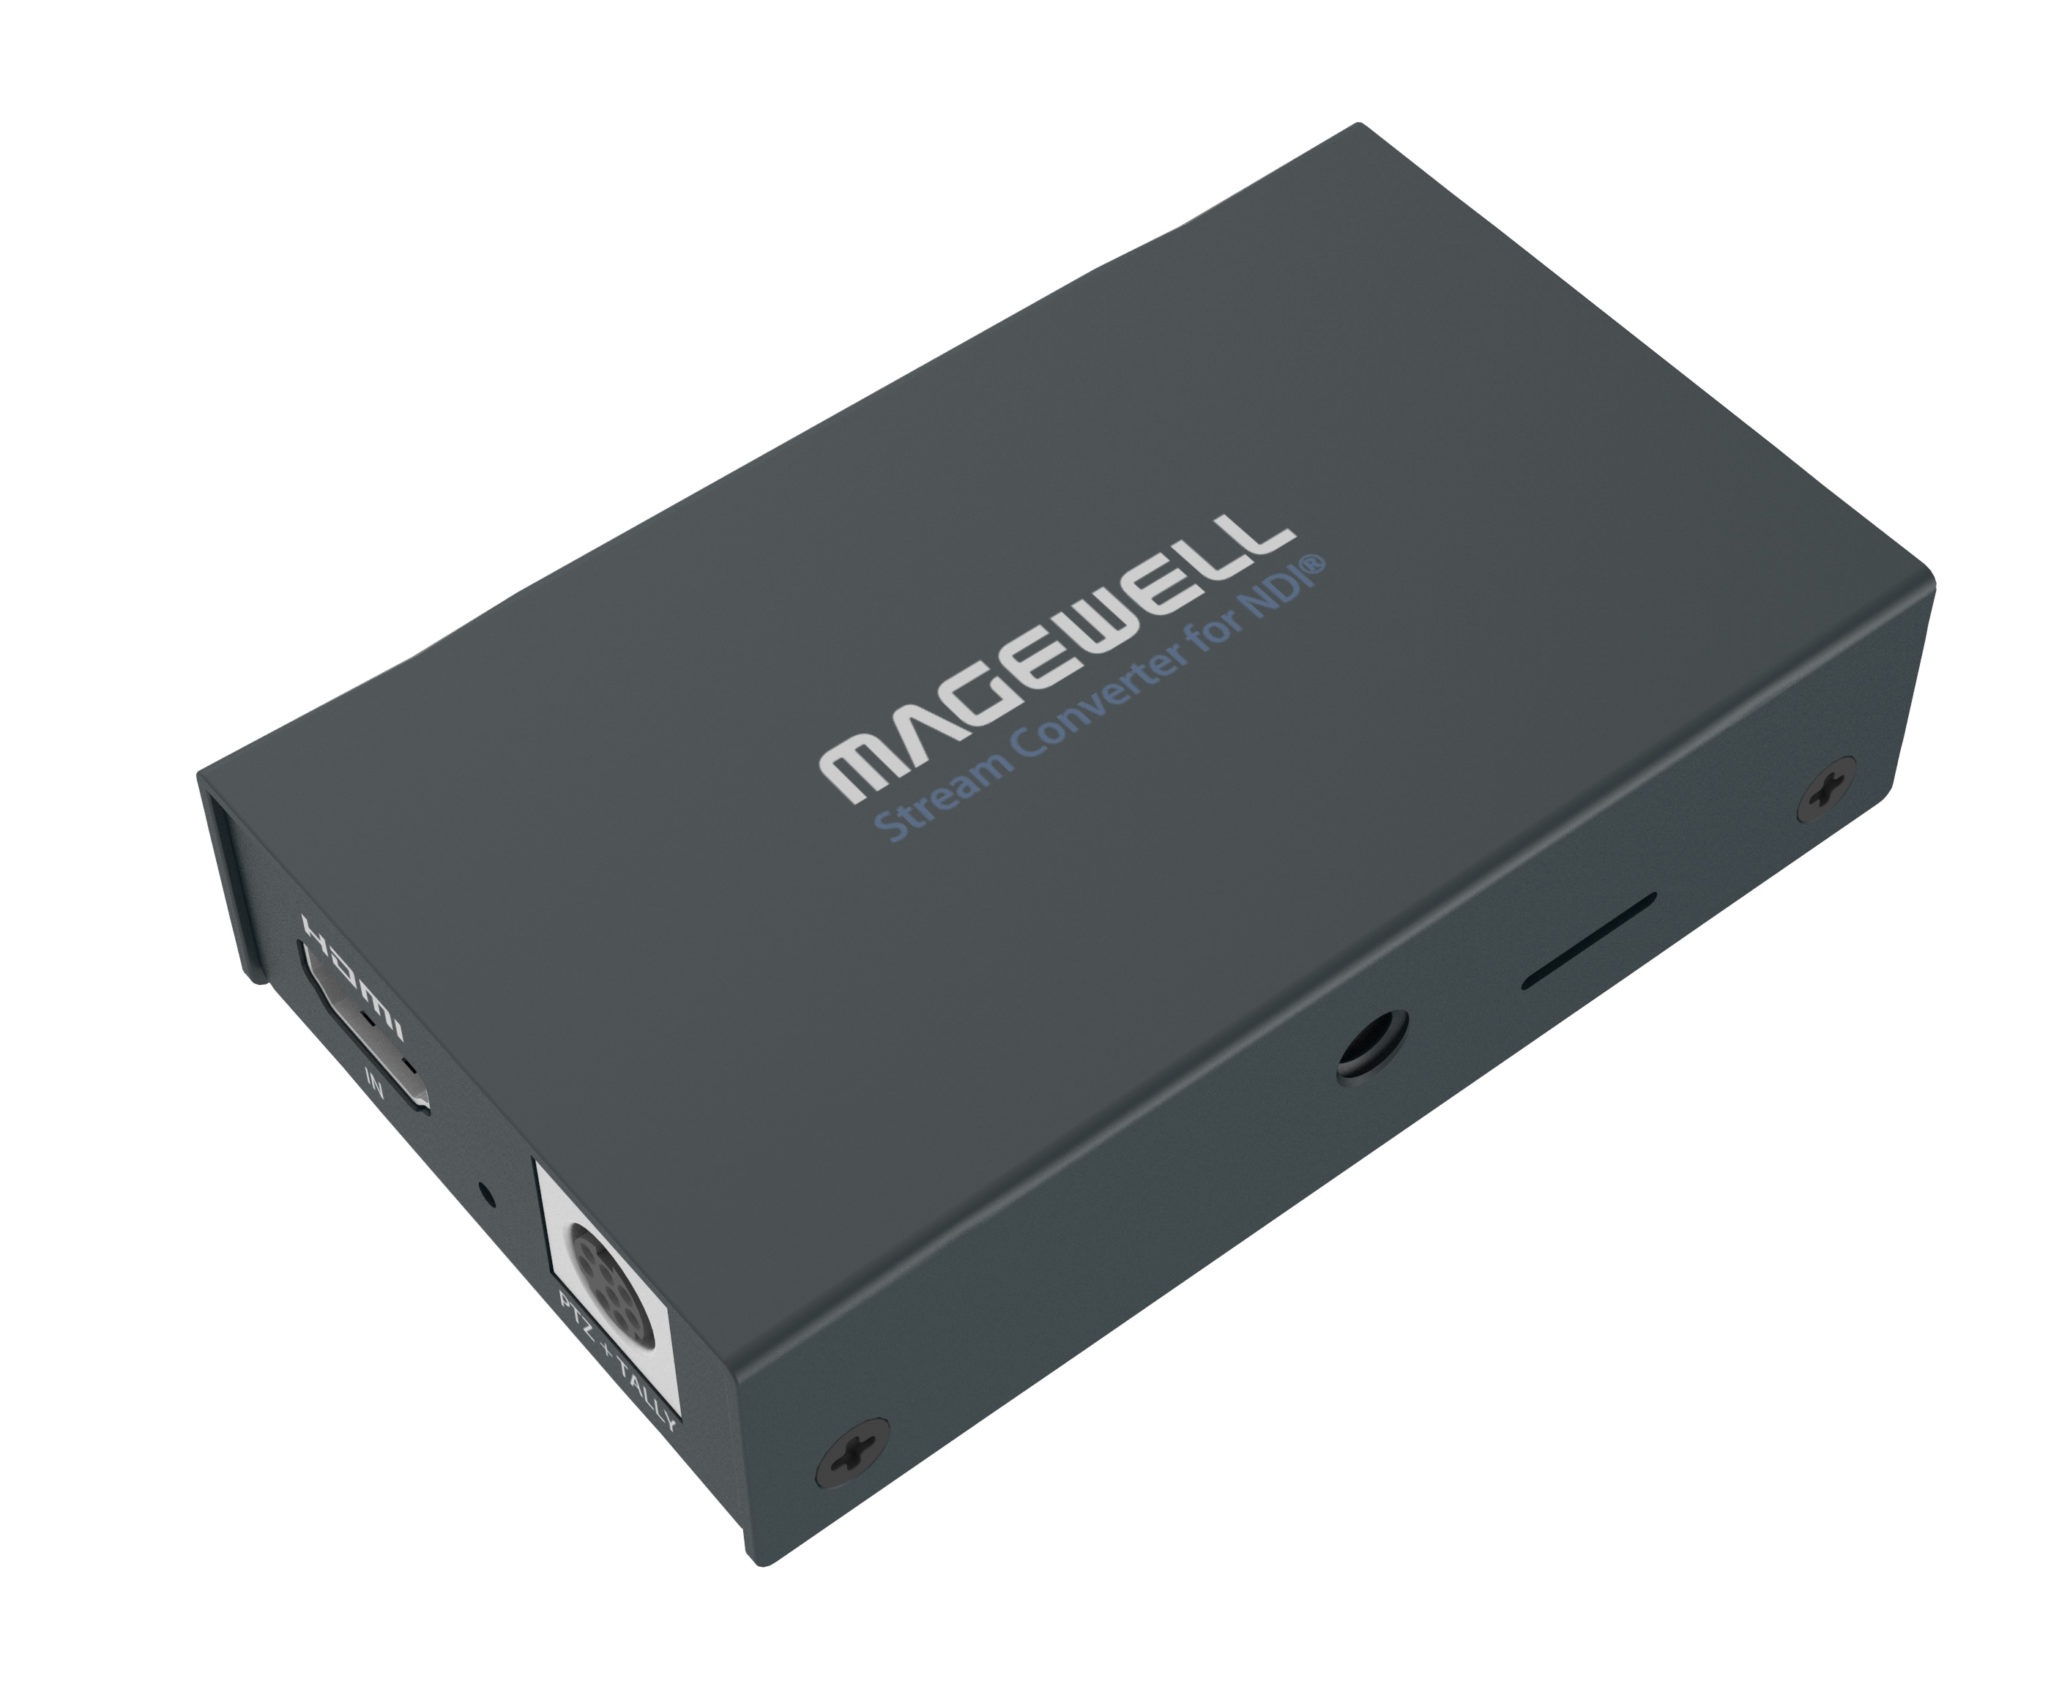 Magewell Pro Convert AIO RX